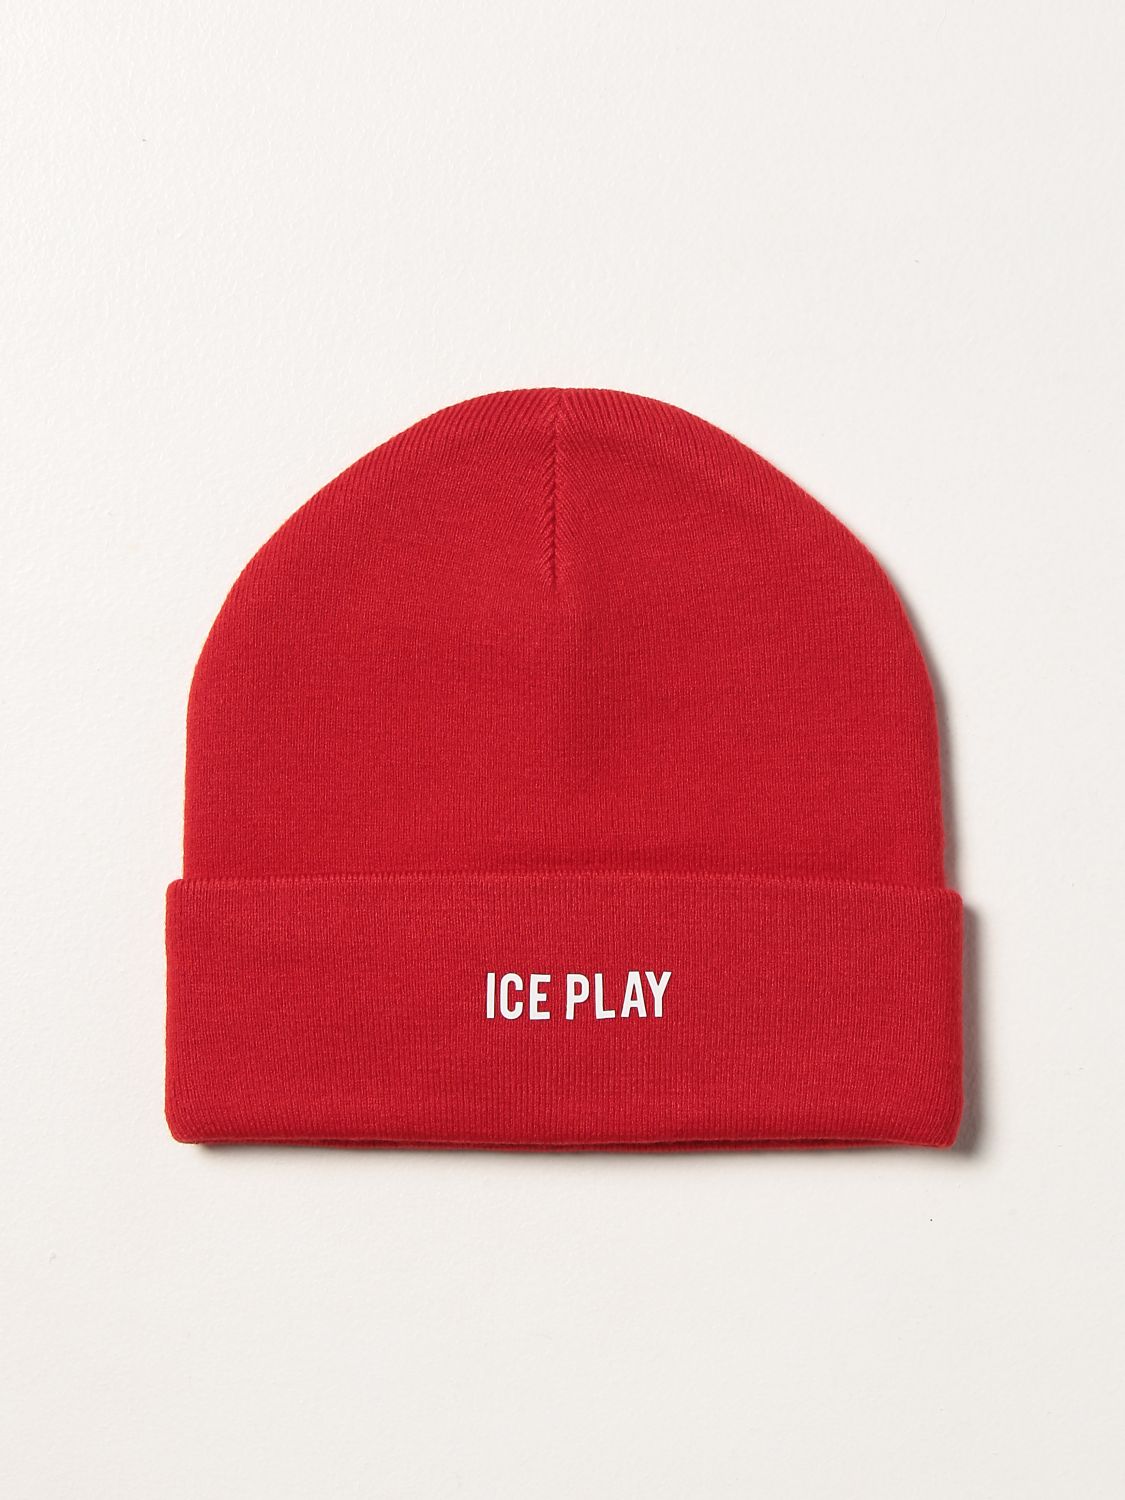 Hat Ice Play: Ice Play beanie hat with logo red 1